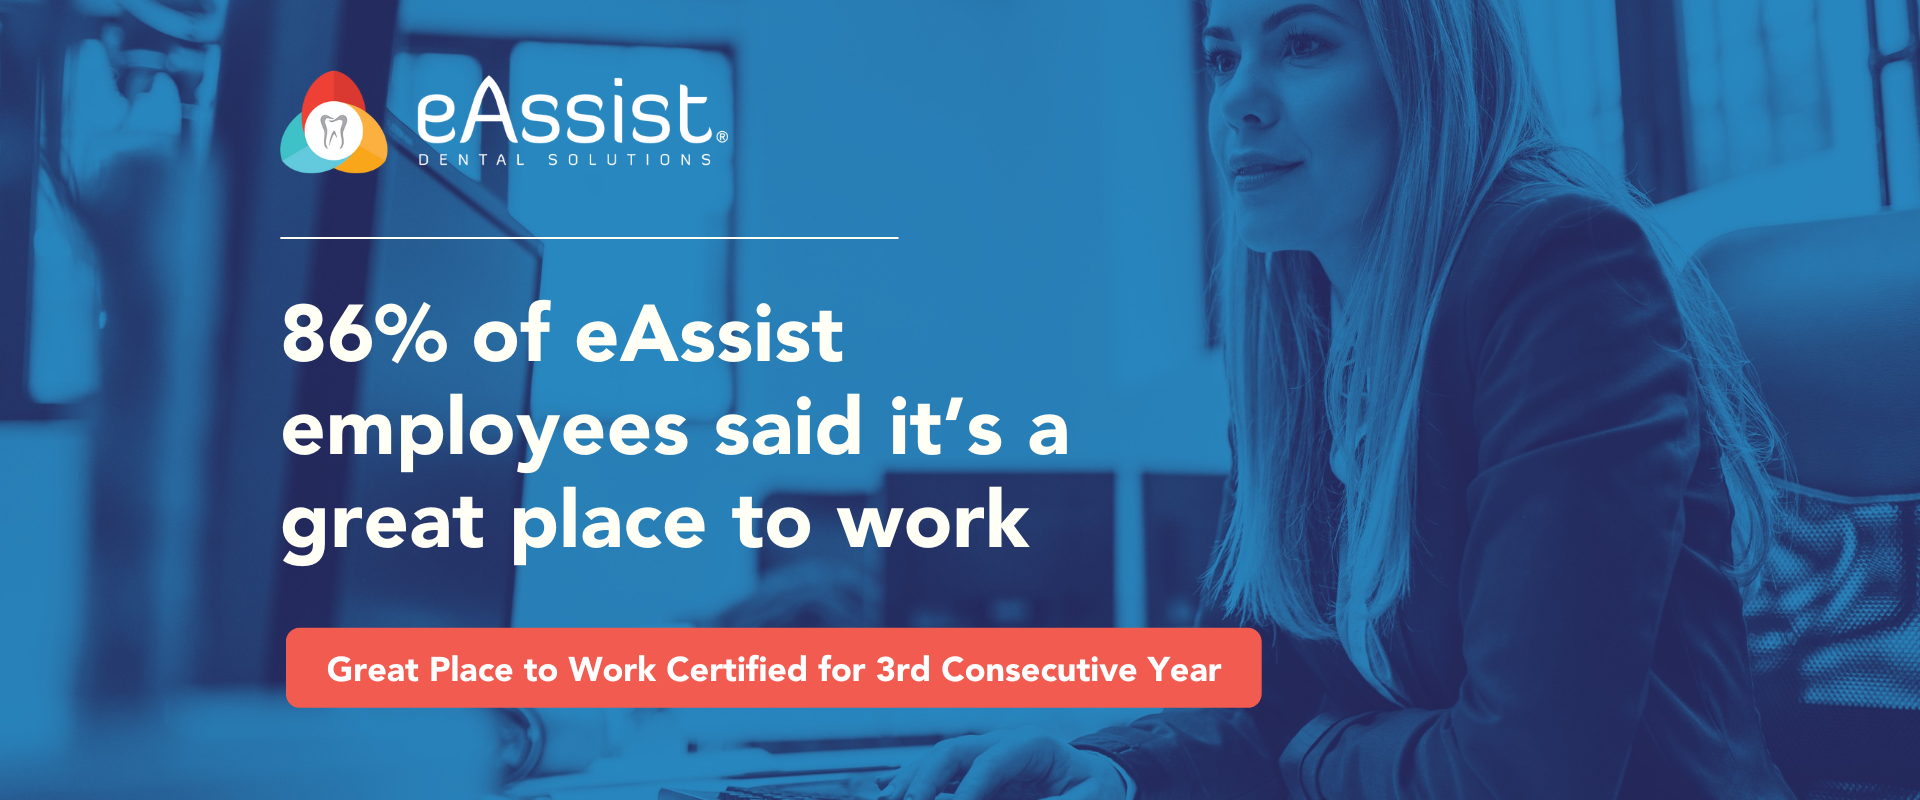 eAssist Dental Solutions Earns Great Place to Work Certification™ for